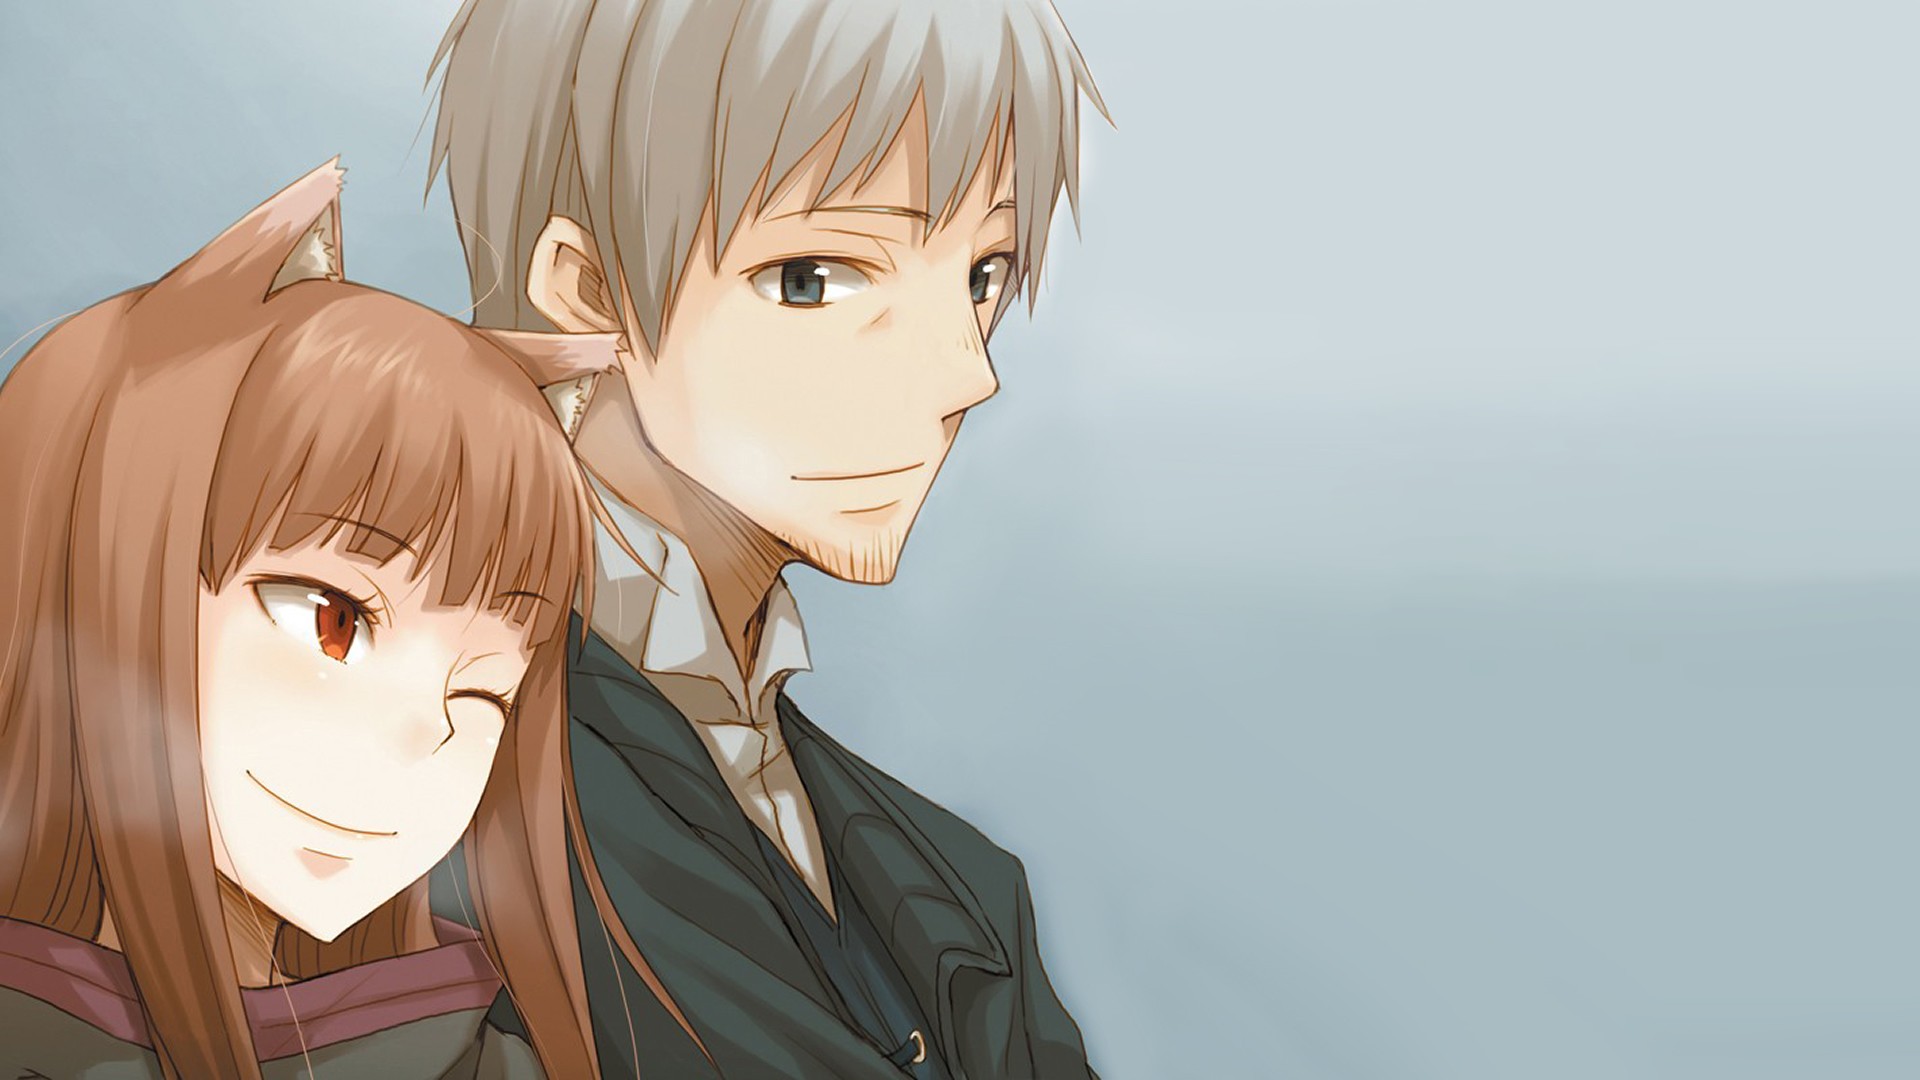 Spice And Wolf Holo Spice And Wolf Okamimimi 1920x1080